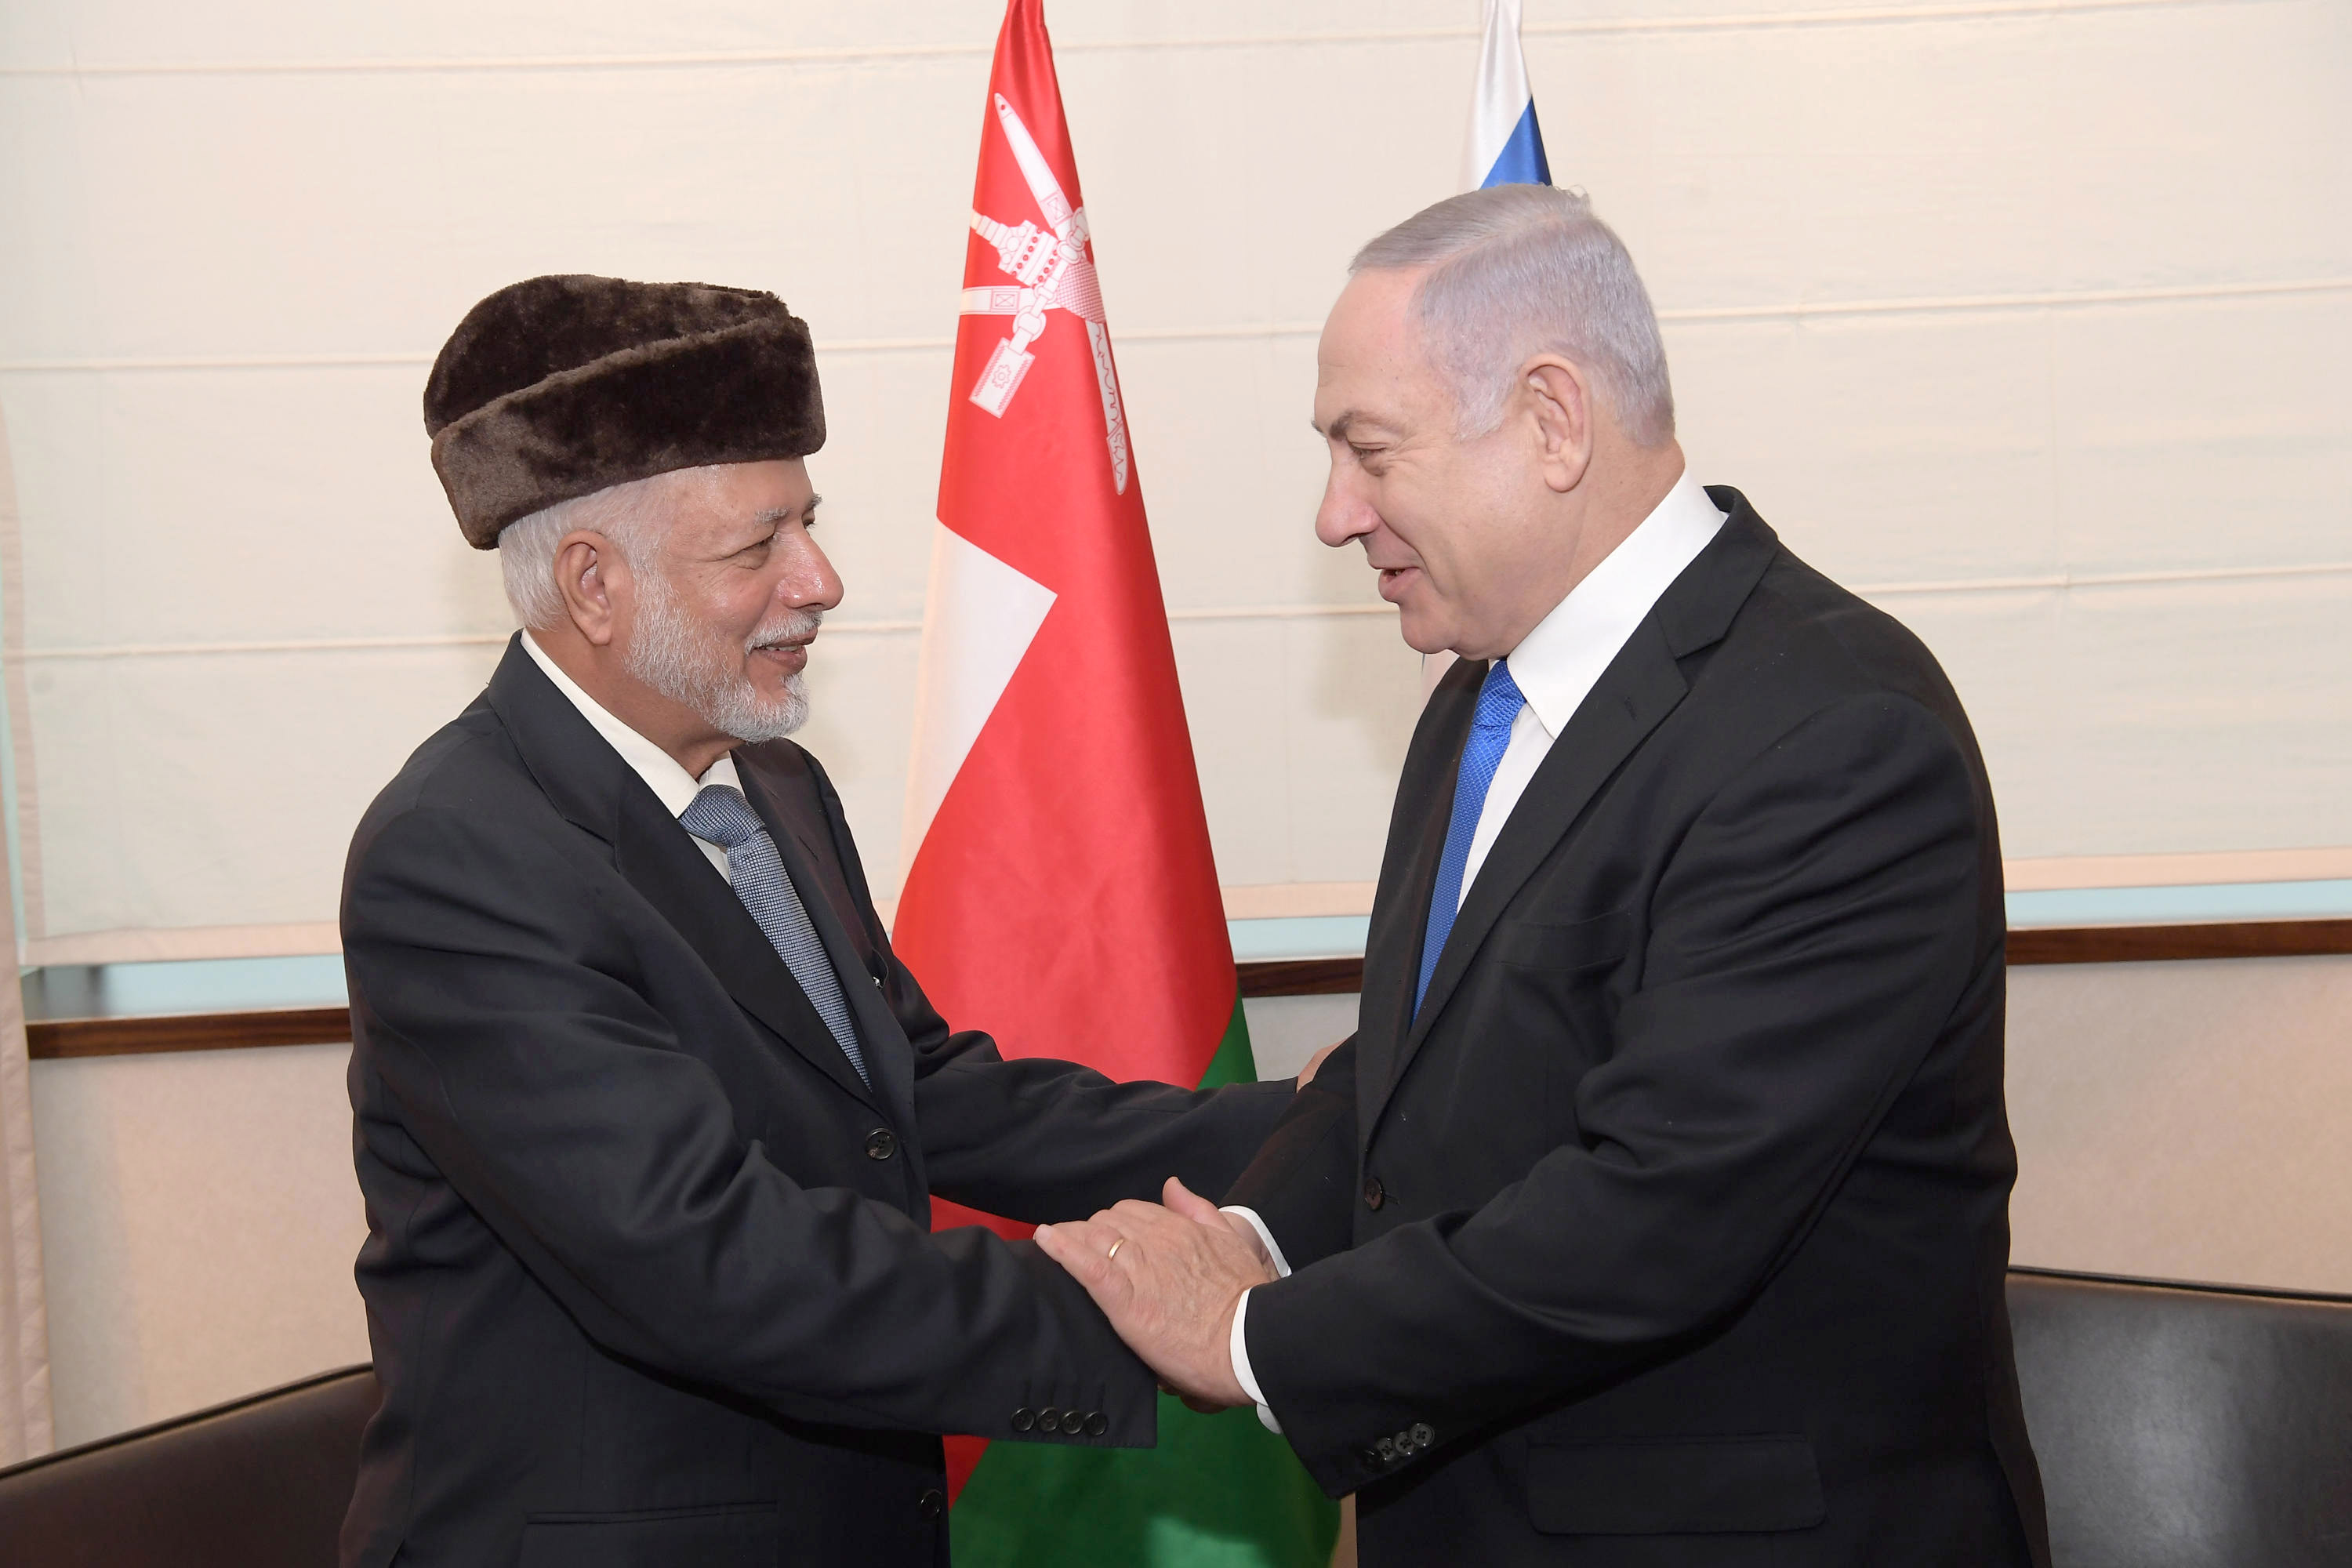 Israeli Prime Minister Benjamin Netanyahu (R) shakes hands with Minister of Foreign Affairs of Oman Yusuf bin Alawi during their meeting on the sidelines of the Warsaw Middle East Summit.